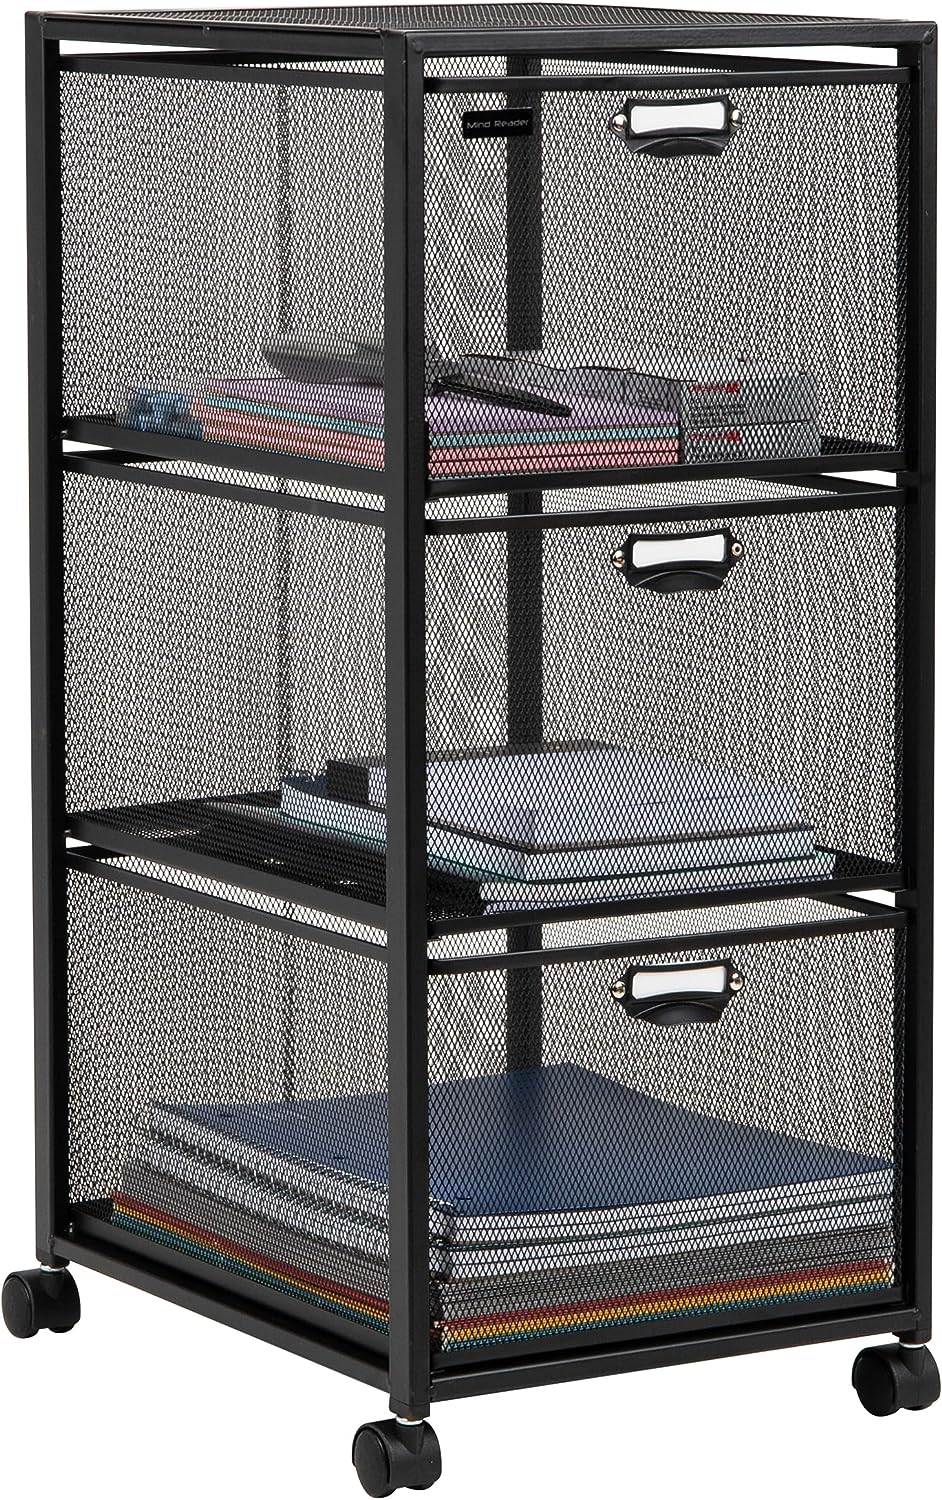 https://bigbigmart.com/wp-content/uploads/2023/09/Mind-Reader-Network-Collection-Rolling-FIle-Cabinet-with-3-Removable-Drawers-Omnidirectional-Wheels-Desk-Organizer-Lightweight-and-Portable-Metal-Mesh-11L-x-14W-x-25H-Black.jpg